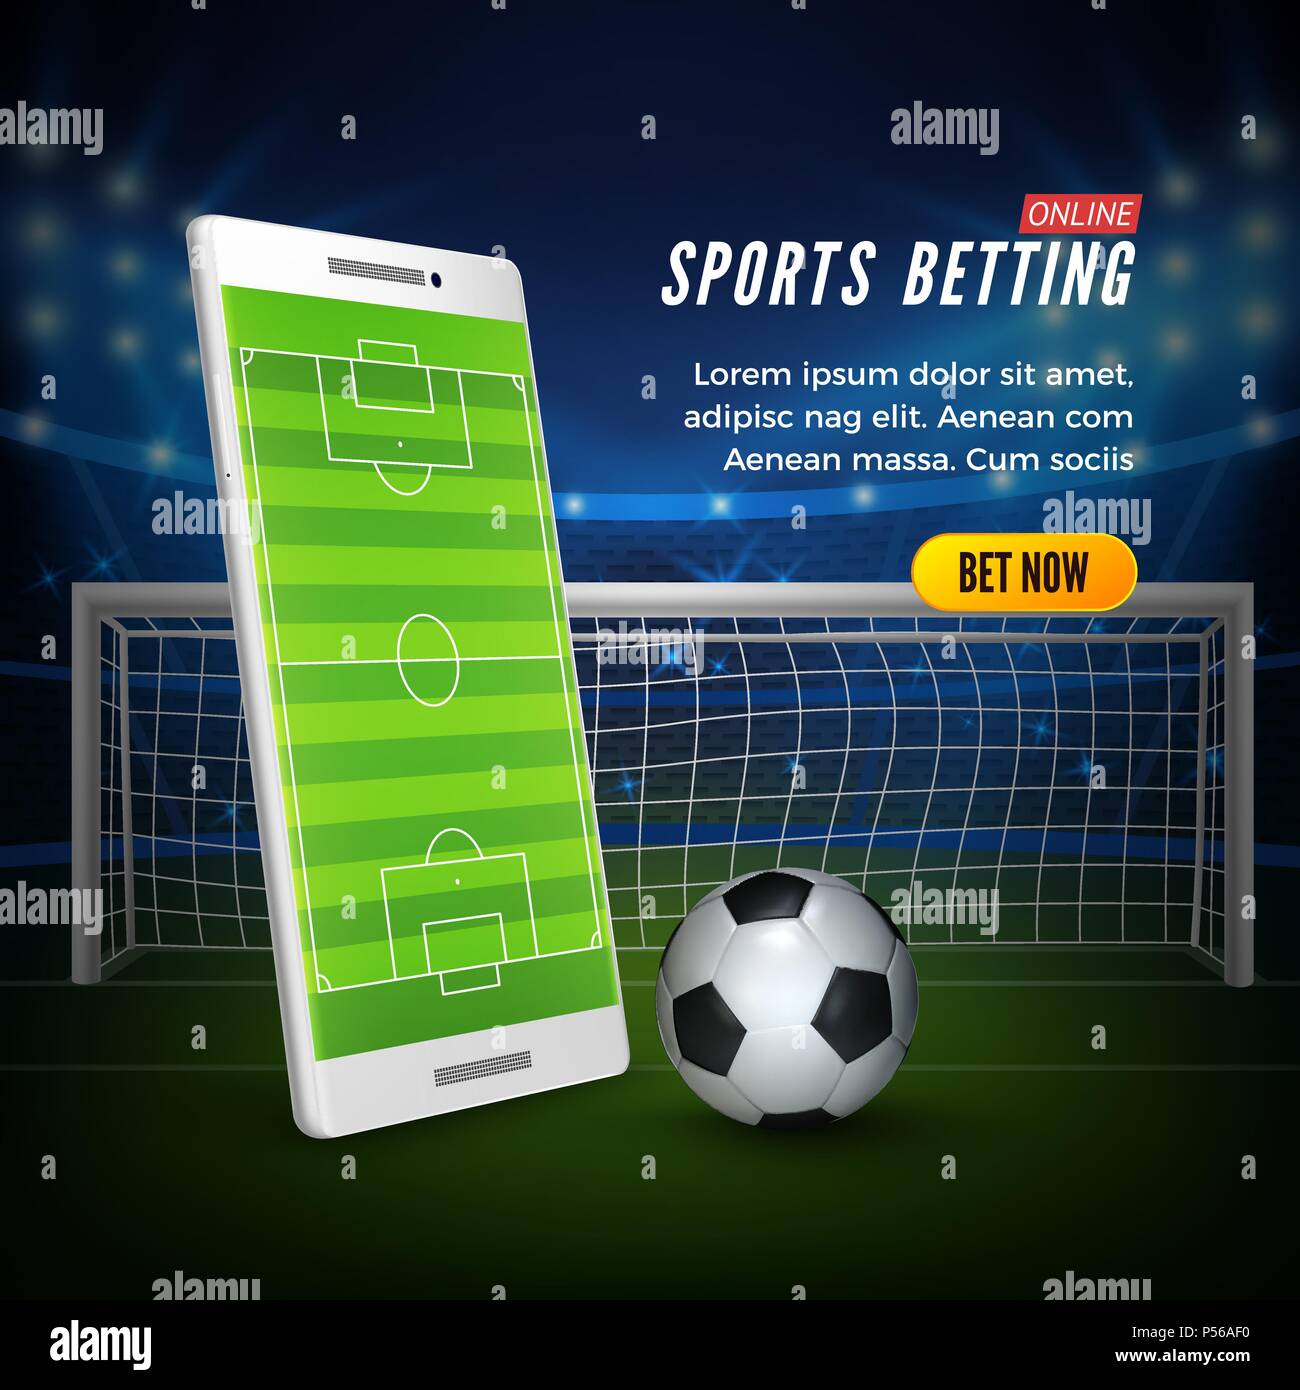 sport betting near me Helps You Achieve Your Dreams